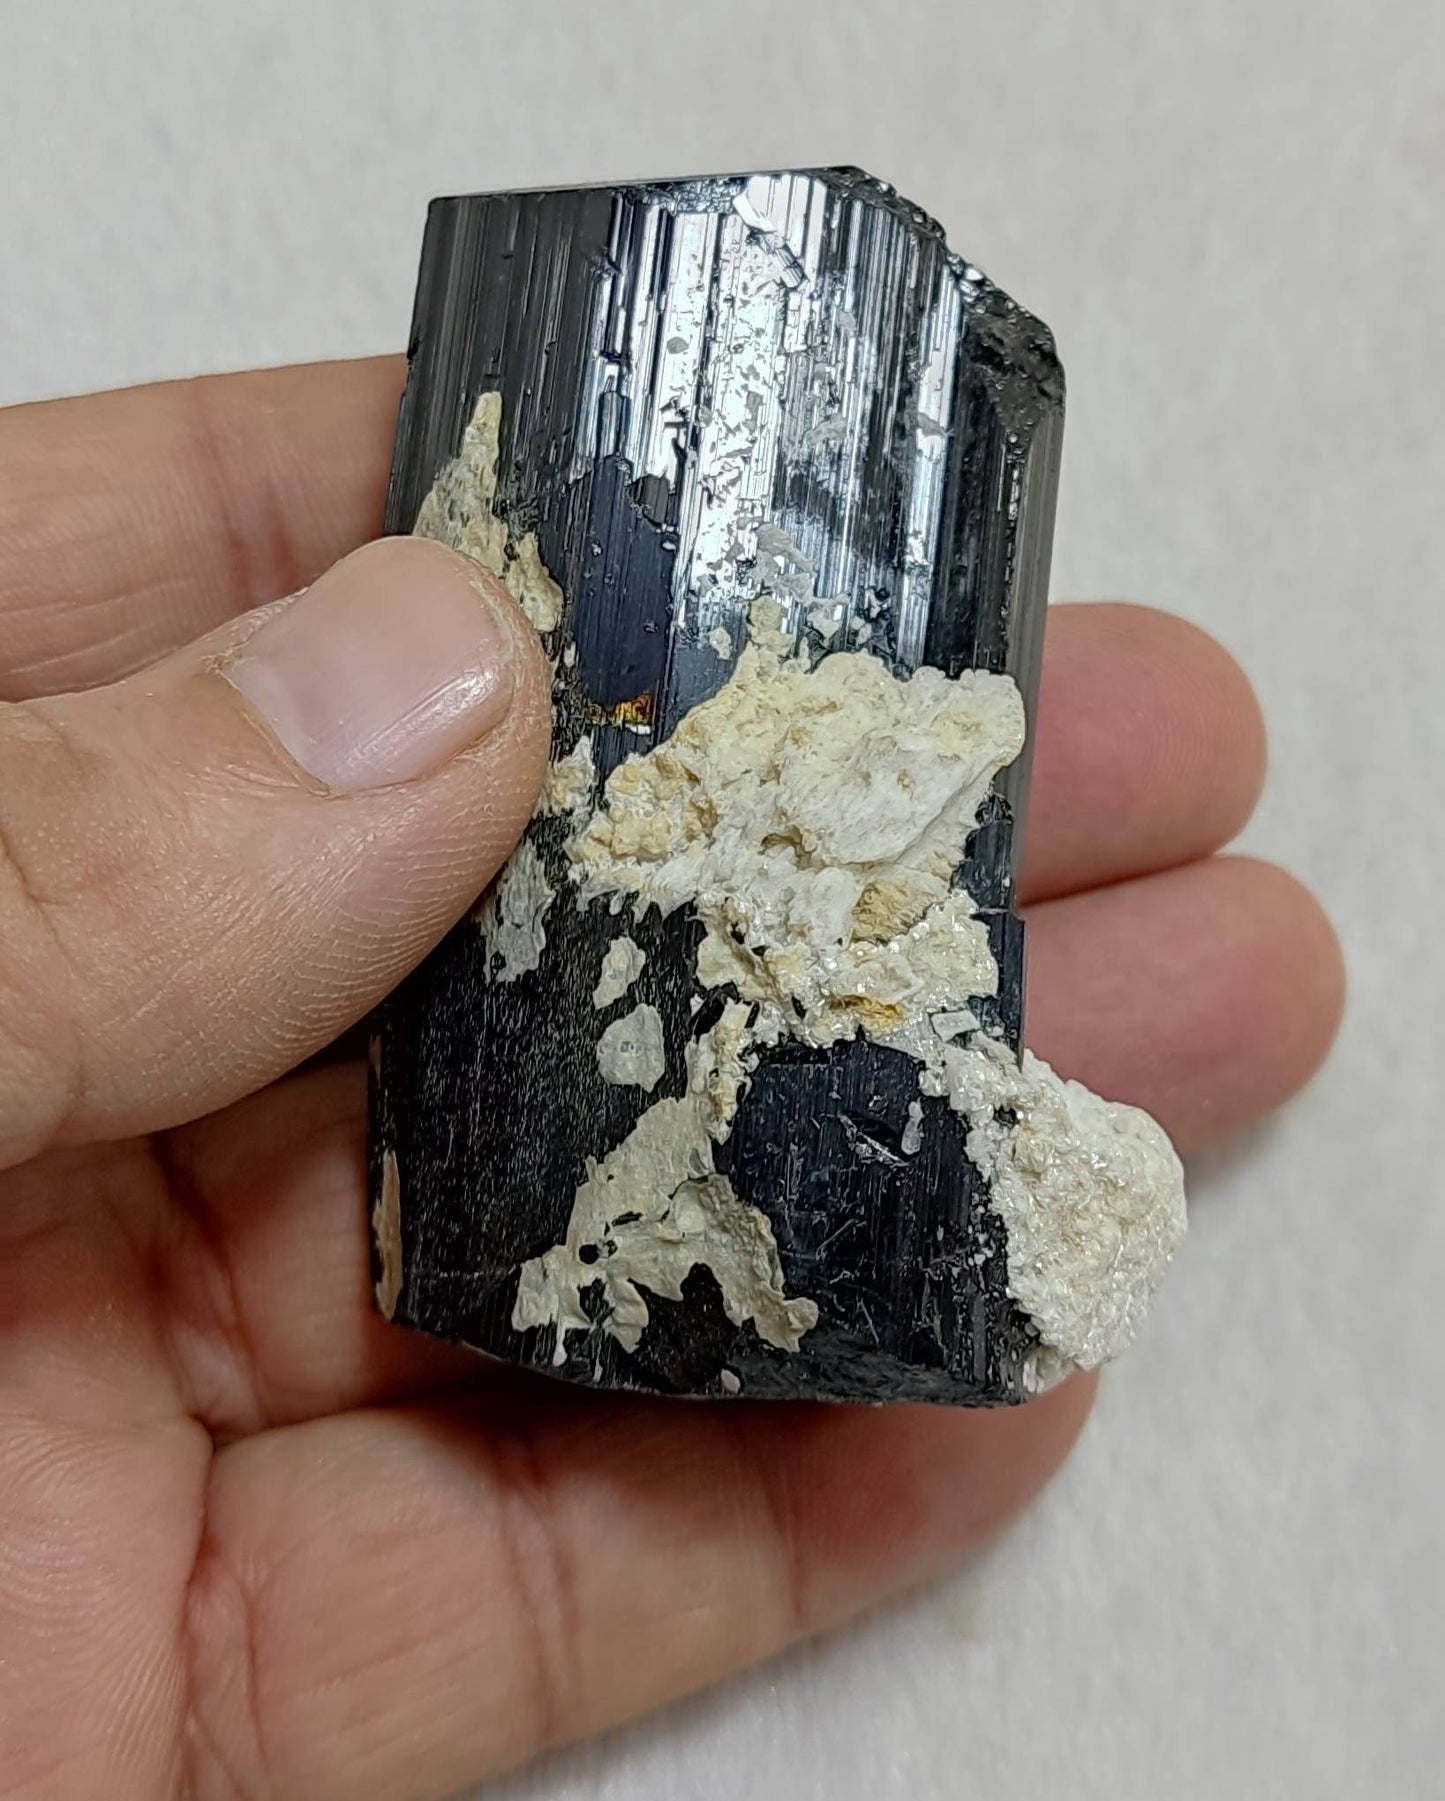 Black Tourmaline crystal with Albite attachment 144 grams